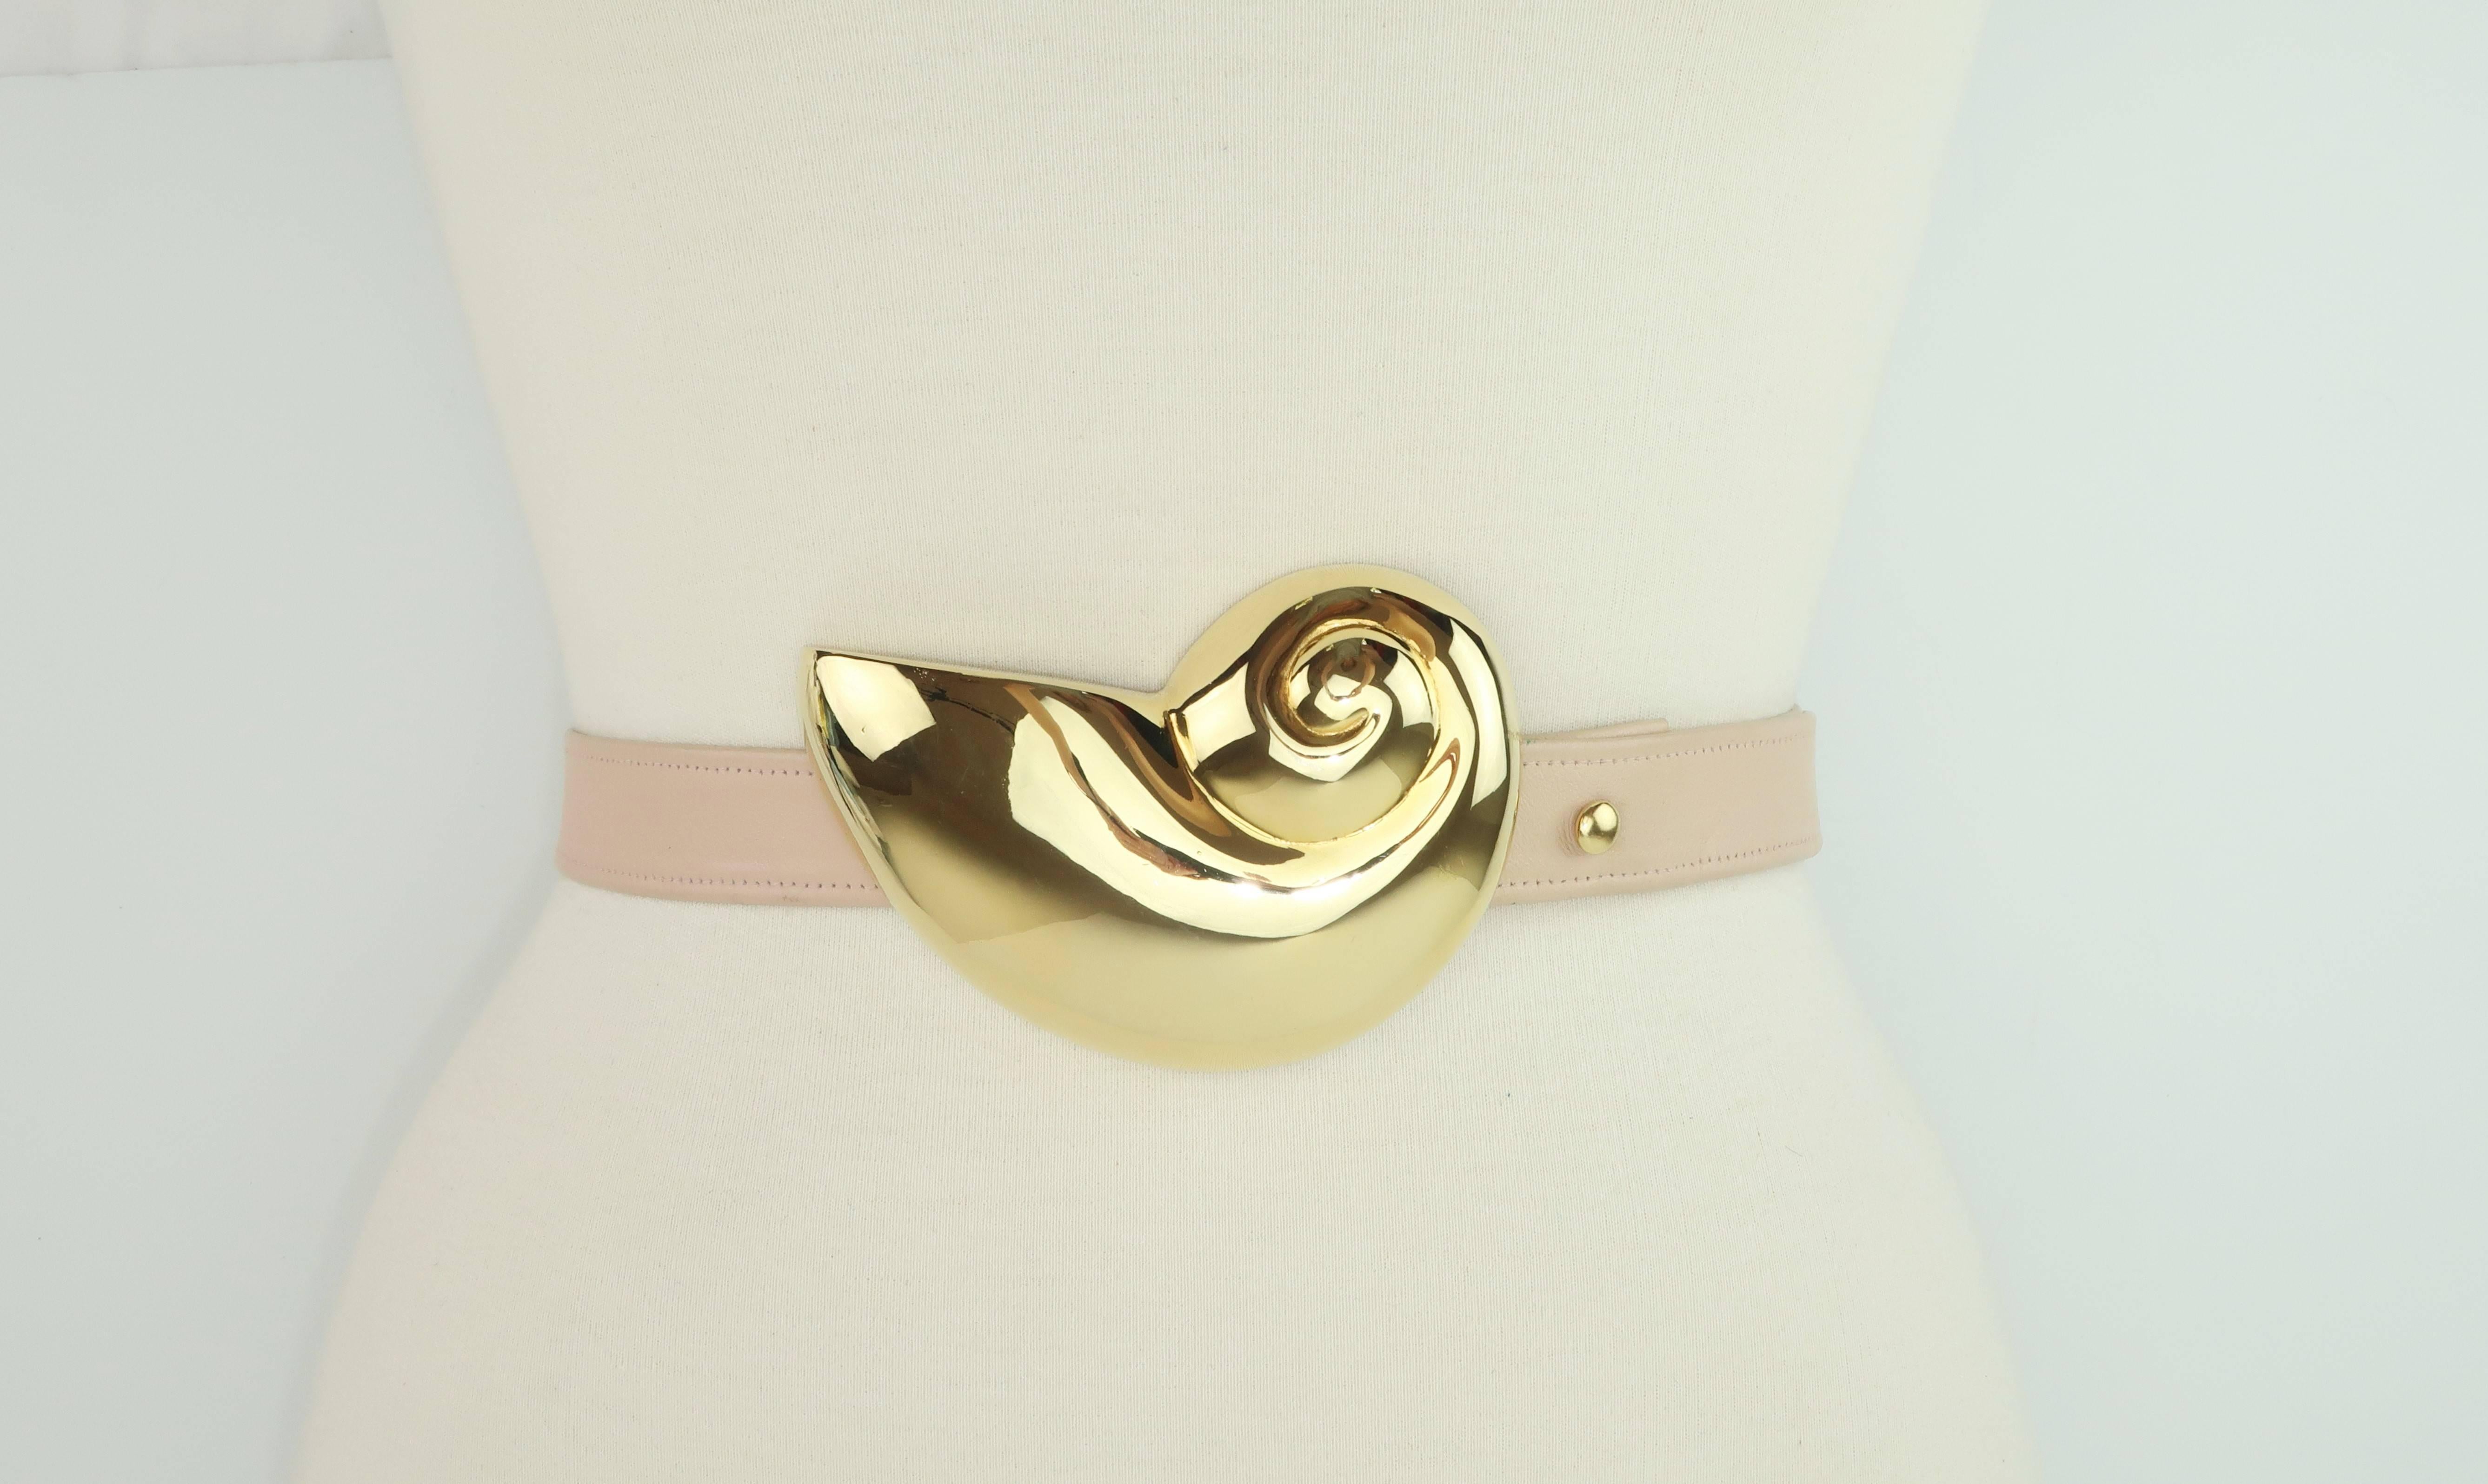 Make a statement with this beautiful gold tone nautilus shell belt buckle by Alexis Kirk.  Kirk's inspiring designs often incorporate sculptural qualities and were always fabricated from quality materials ... this belt is no exception.  The buckle